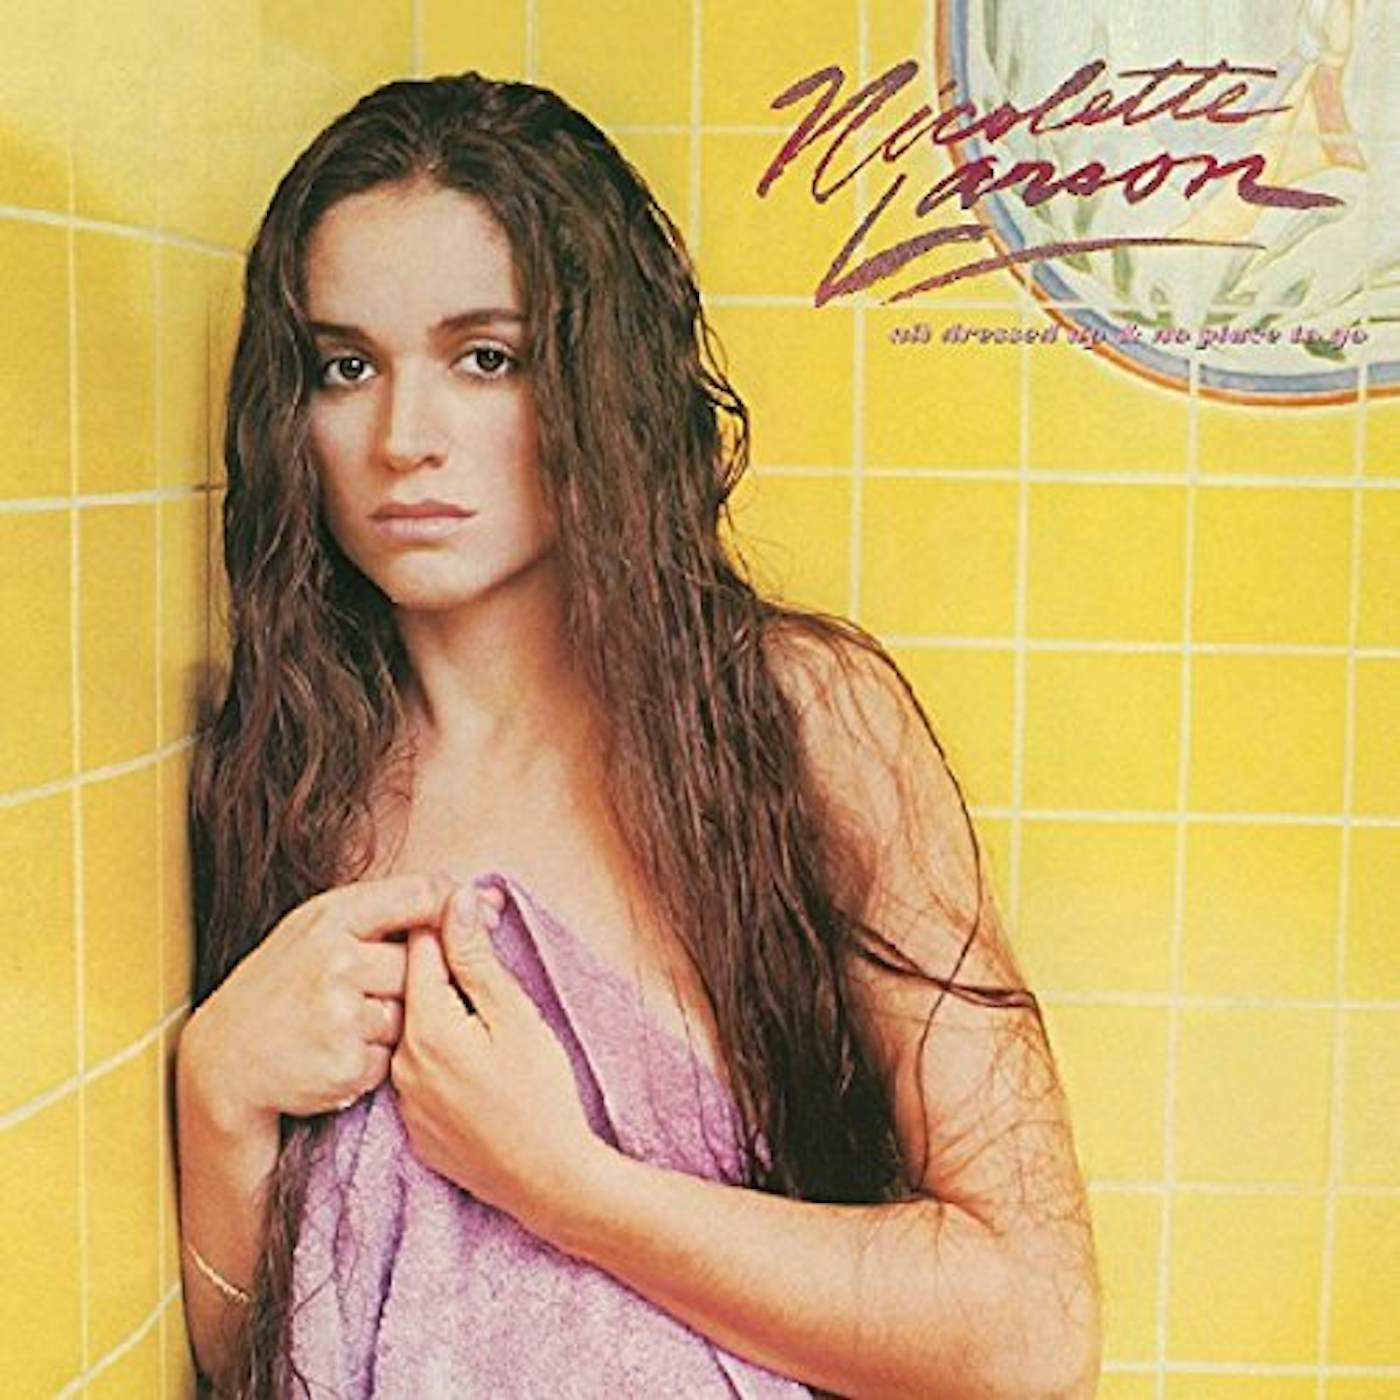 Nicolette Larson ALL DRESSED UP & NO PLACE TO GO CD